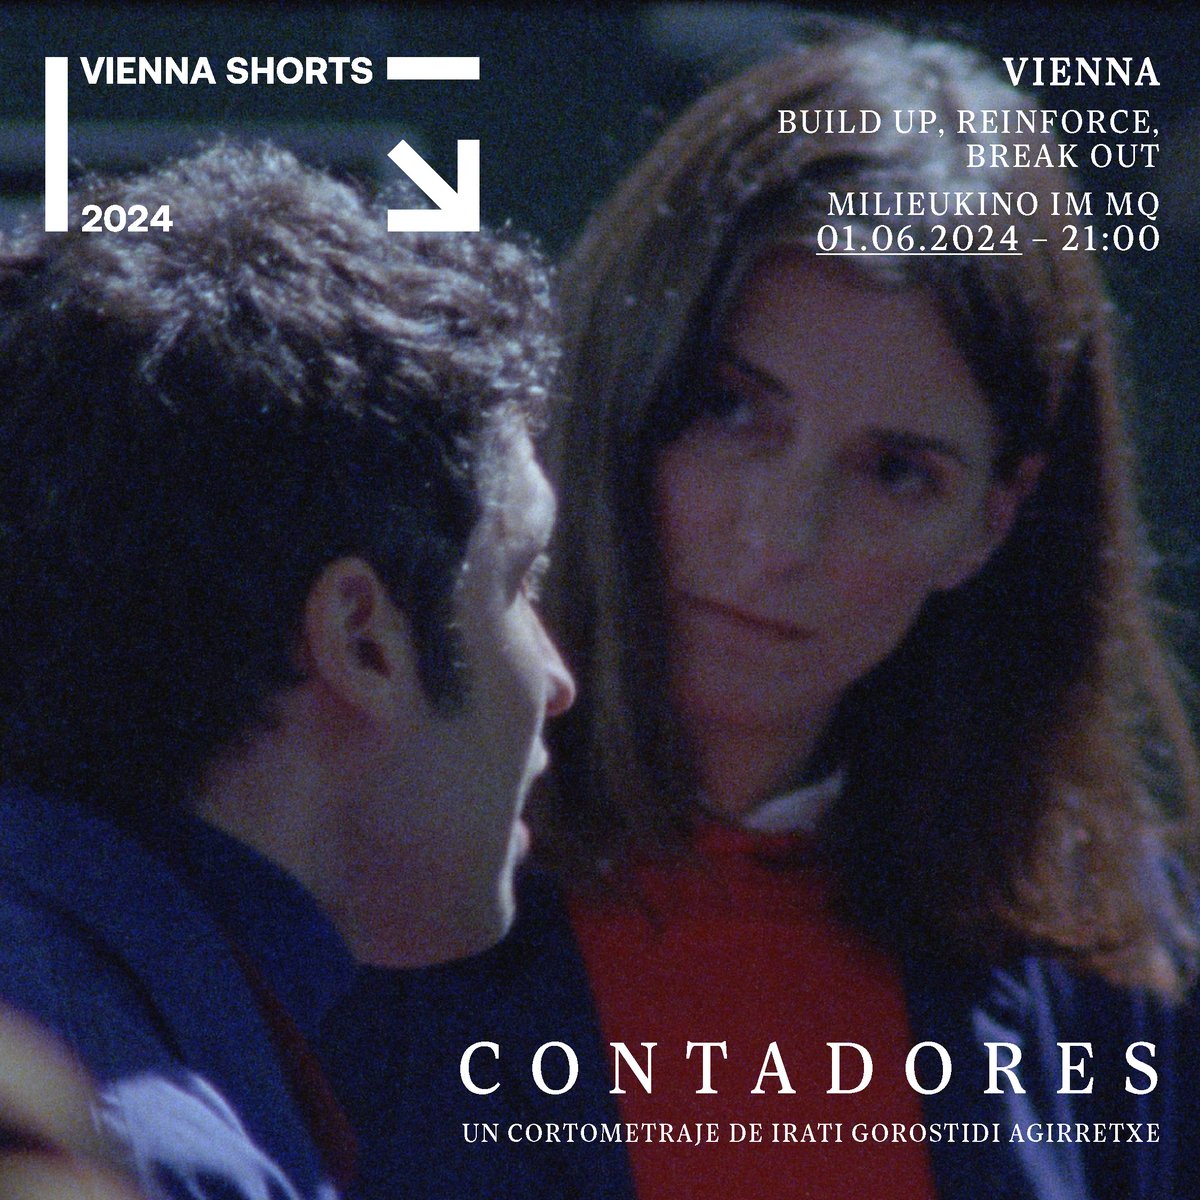 📌 The next stop on the international #Contadores tour will be... Vienna! 🇦🇹 On 1 June, @irati_gorostidi's short film will be screened at @viennashorts, as part of the 'Build Up, Reinforce, Break Out' programme 😍 We are excited to be part of this selection!